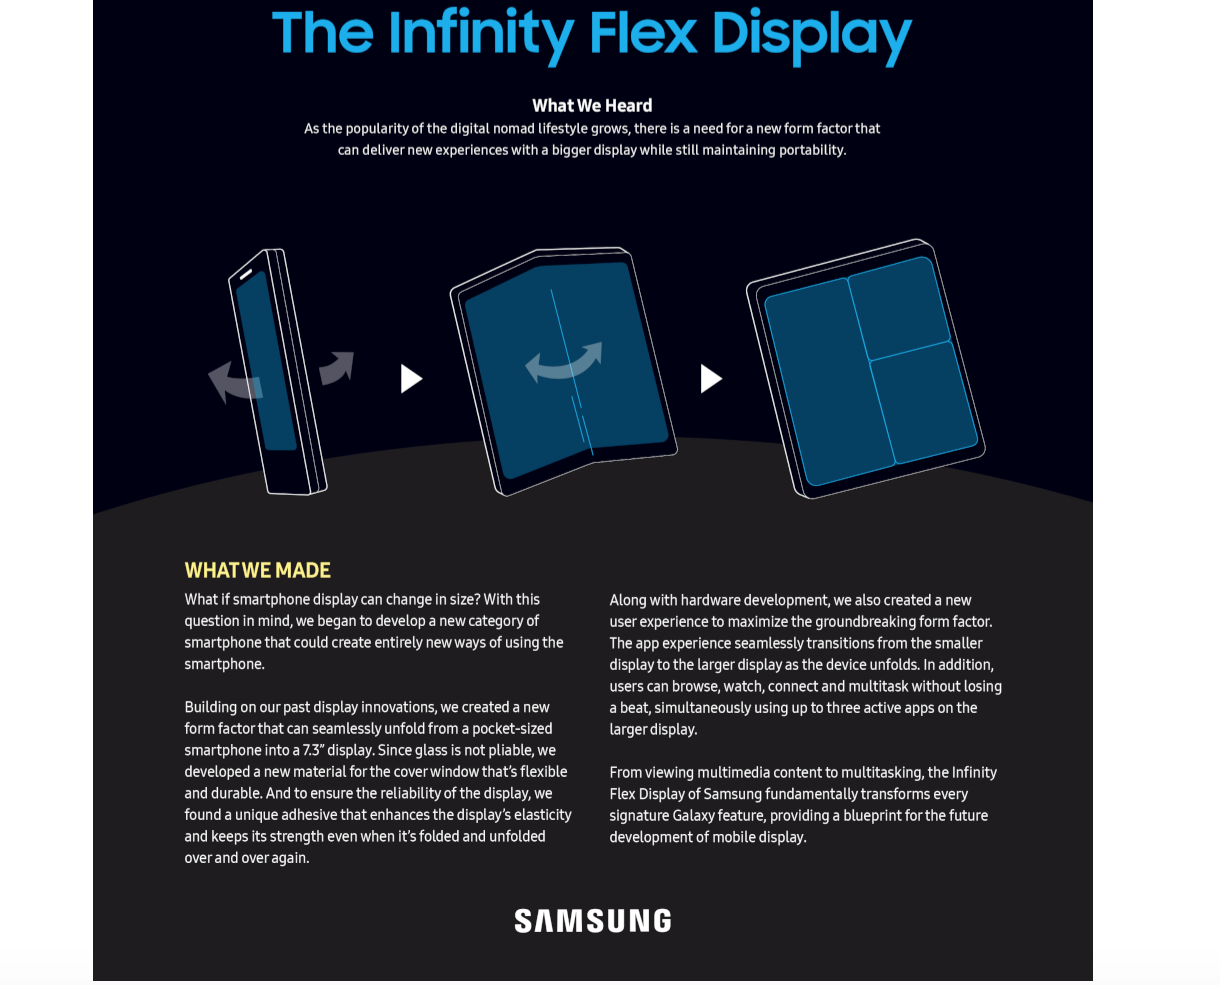 Samsung details the idea behind its foldable Infinity Flex display